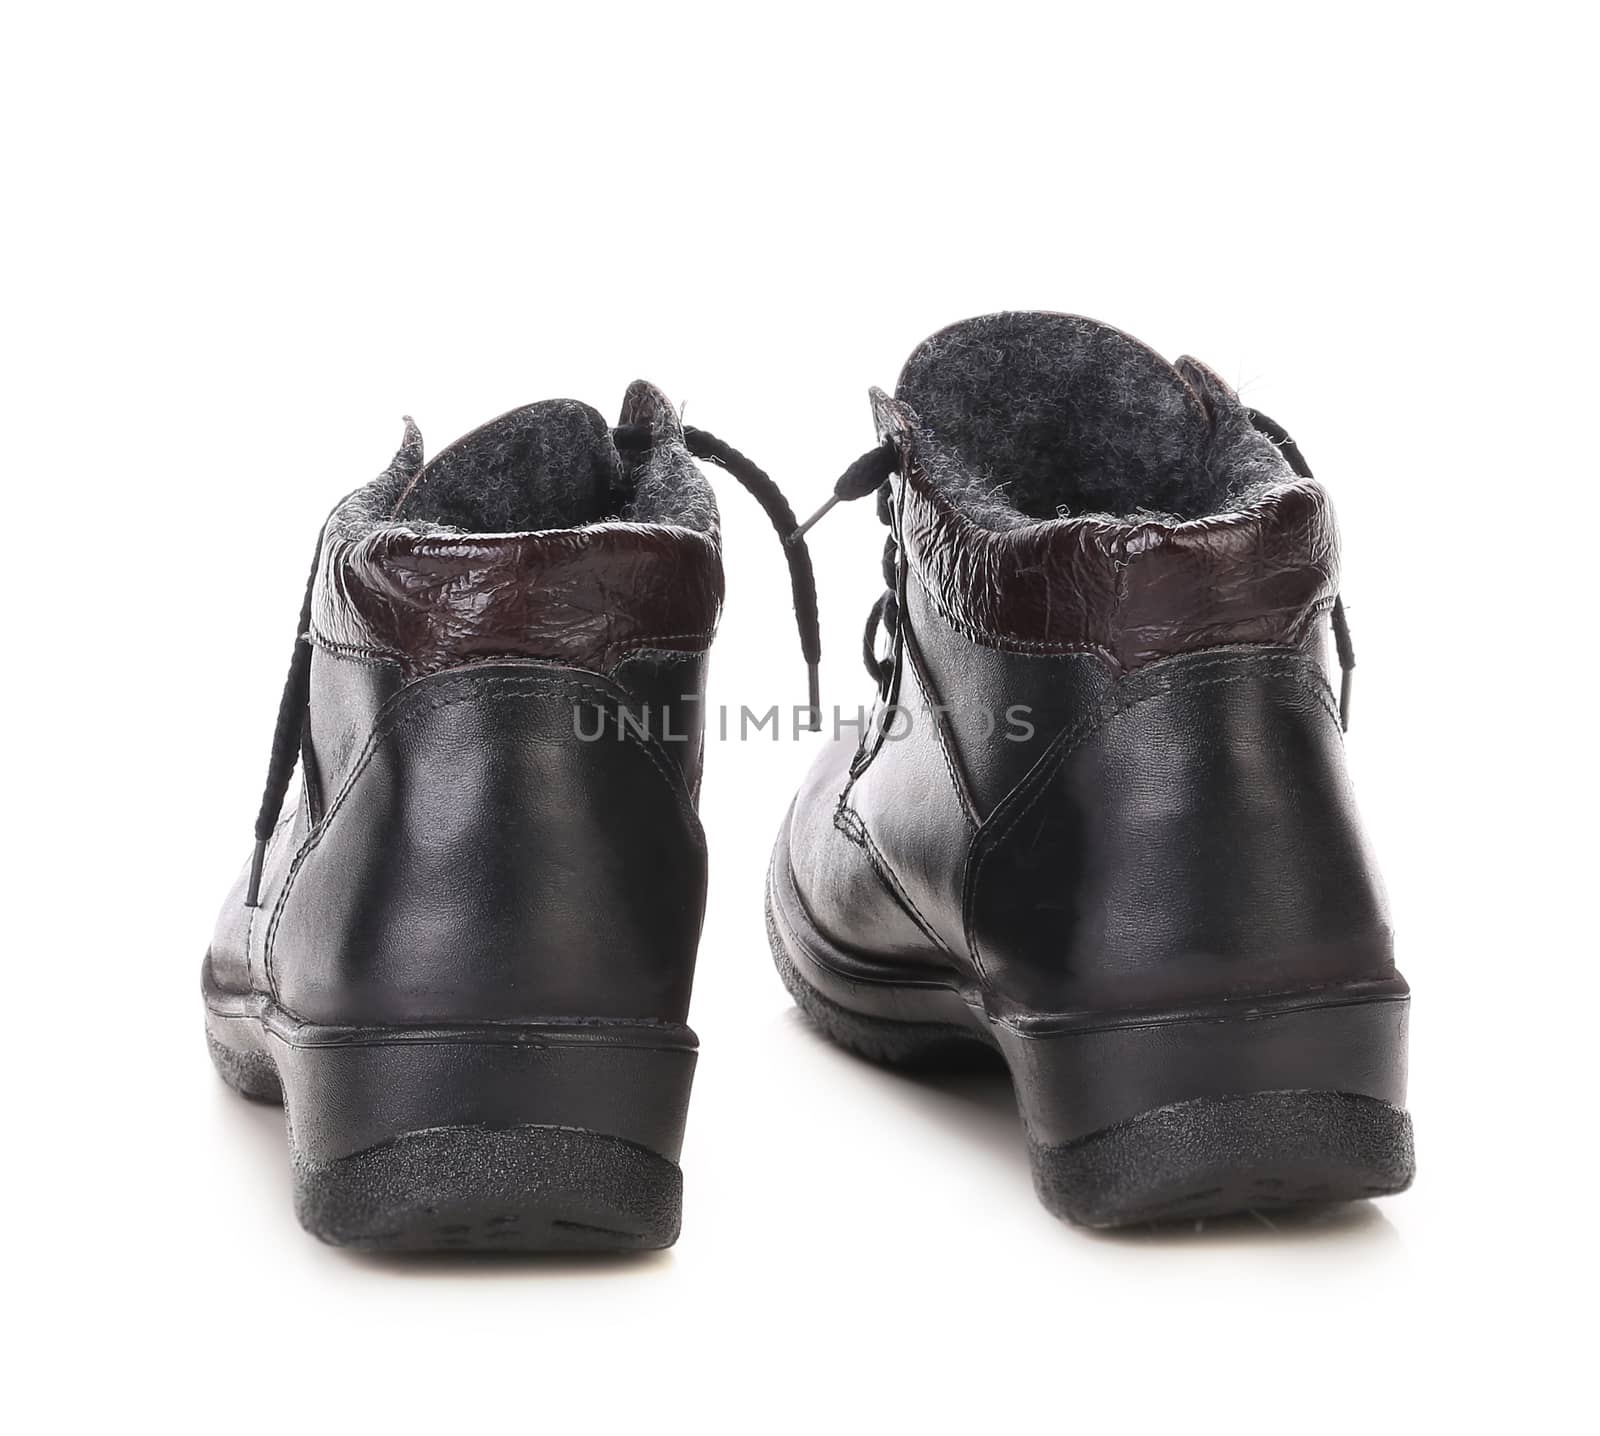 Black winter boots. Isolated on white background.